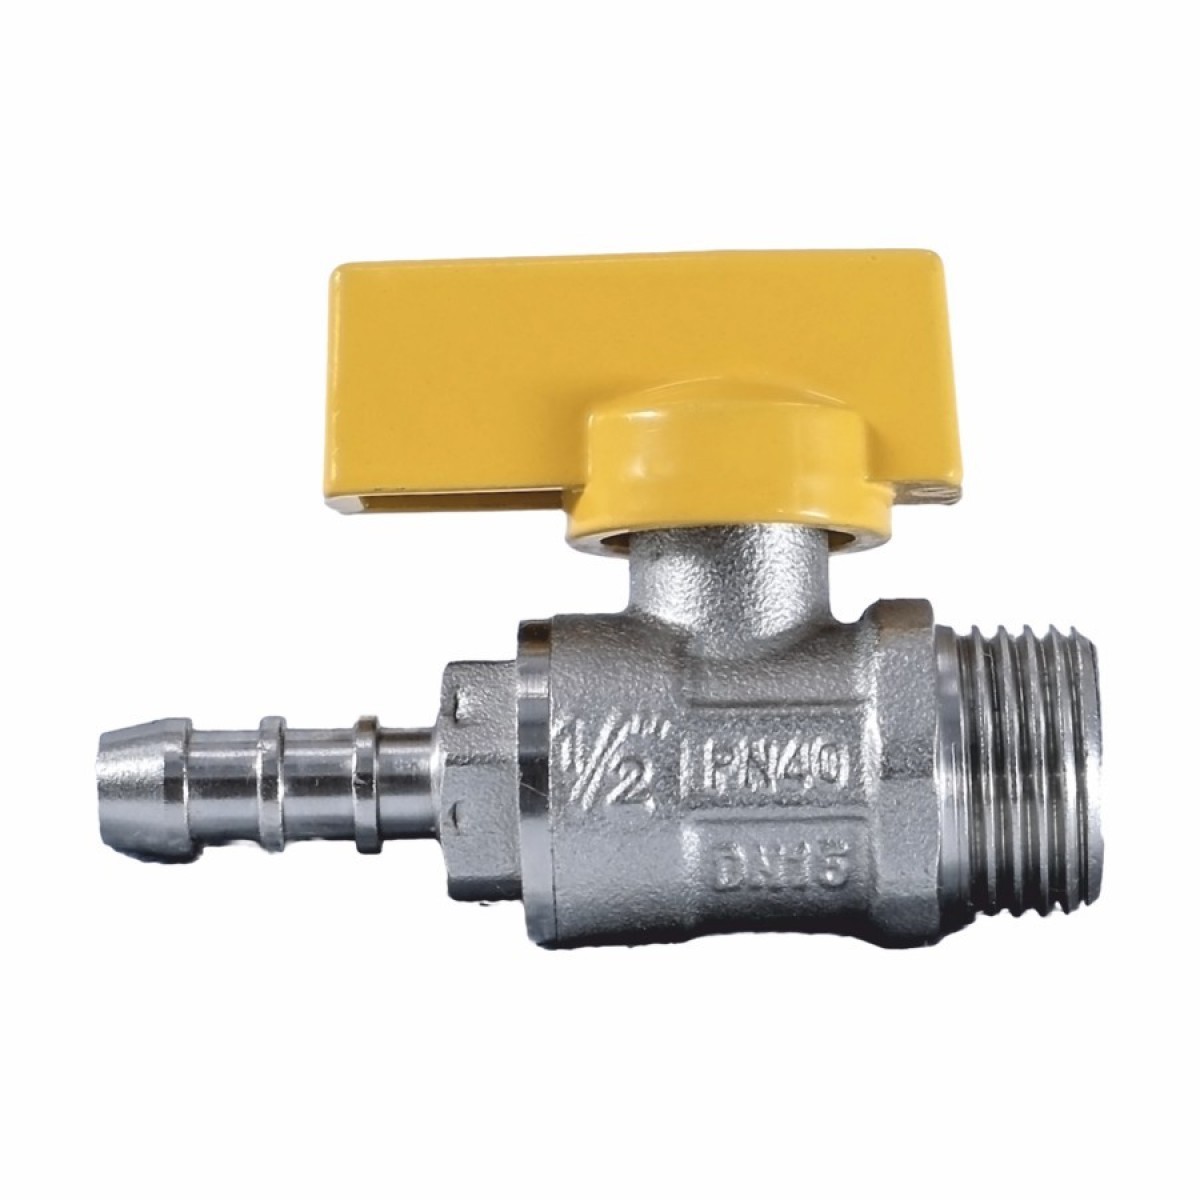 RN Forged Brass Nozzle Valve, Nickel Plated